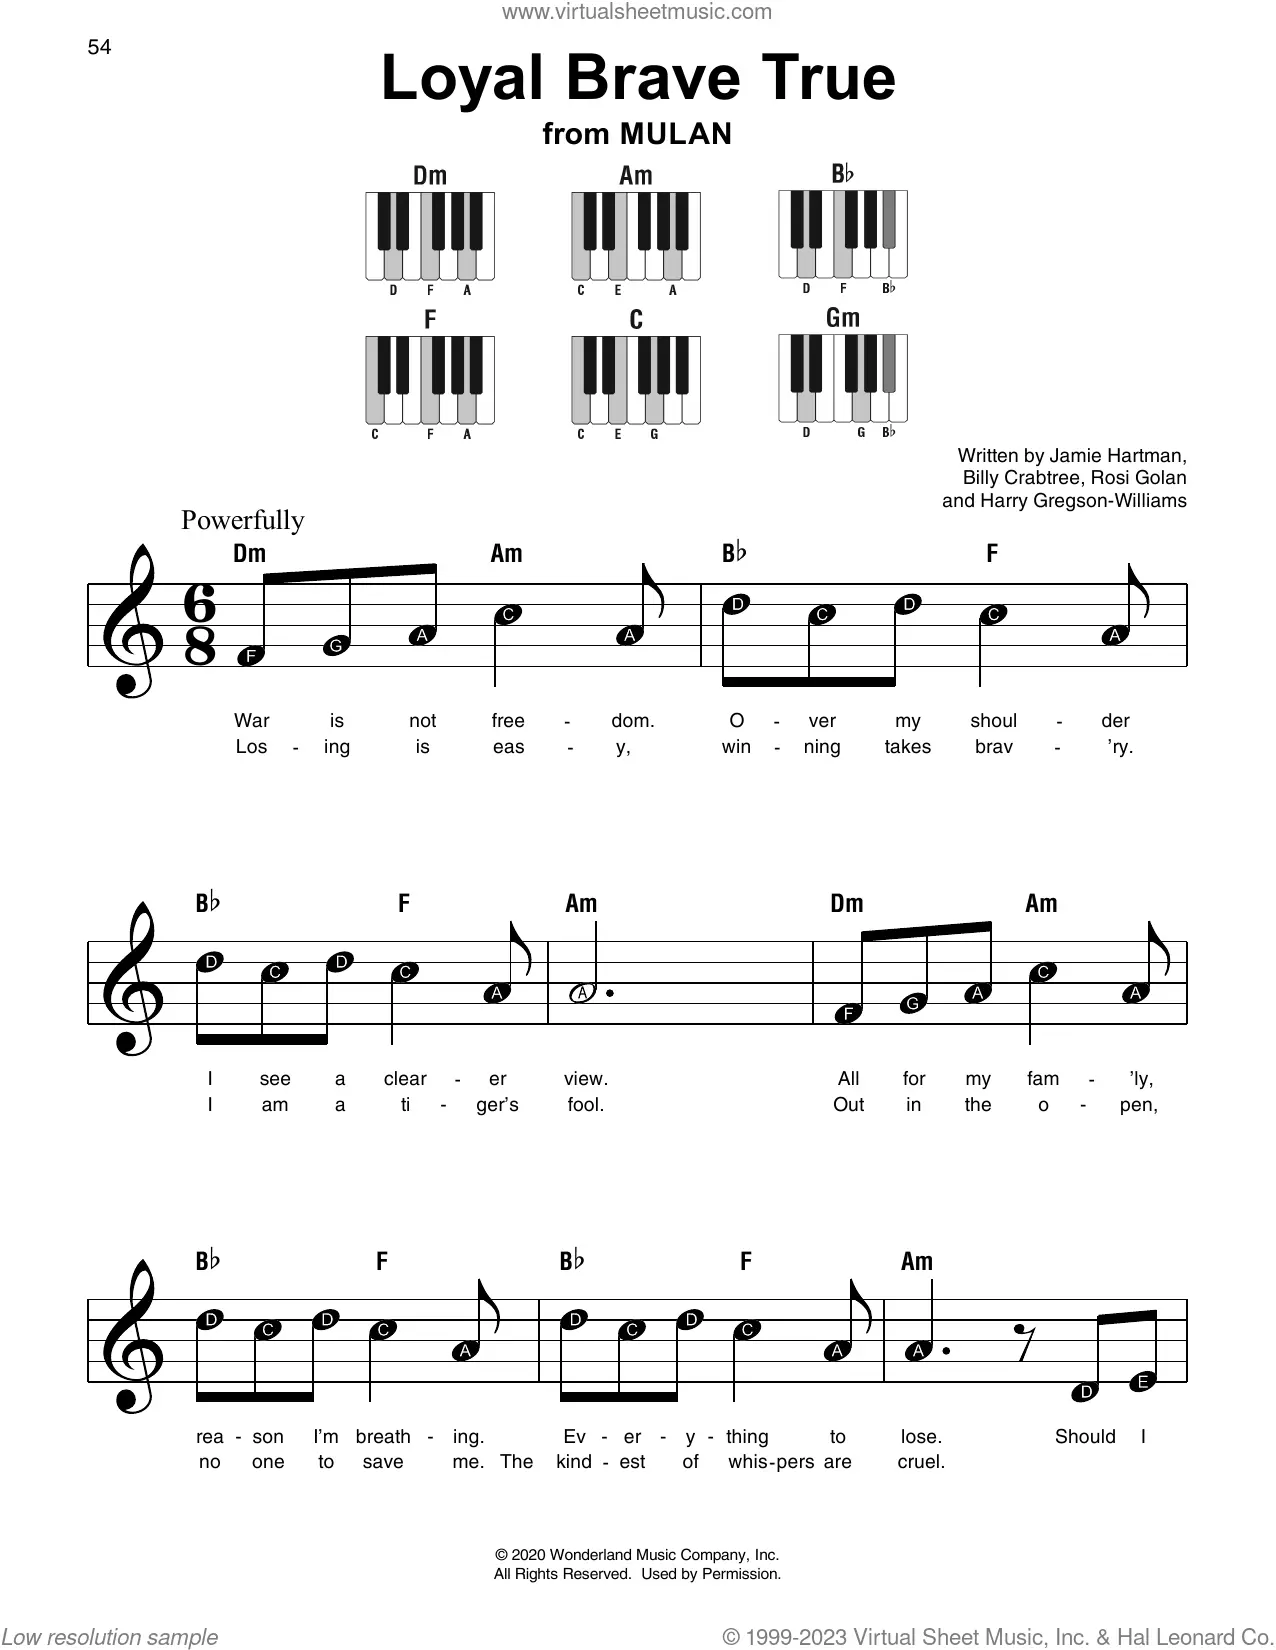 Love Will Find a Way" Sheet Music by Christina Aguilera for